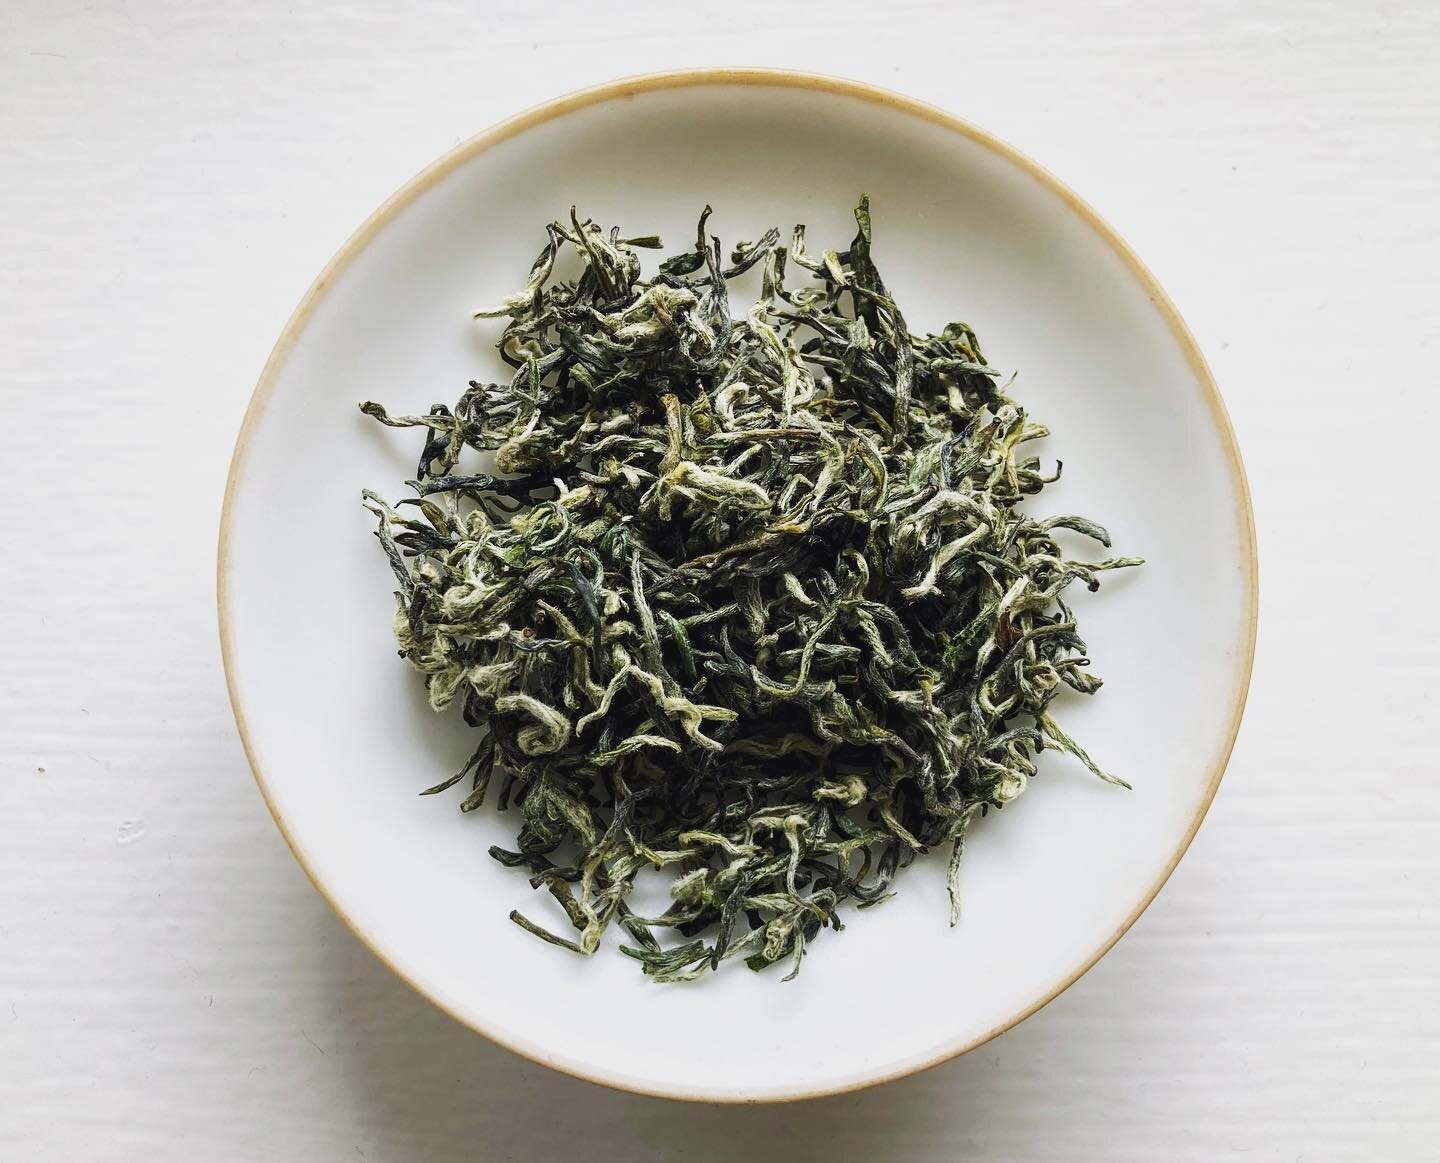 🍃The fluffiest tea I have ever seen 🥰 Cloud Mist Green from @white2tea April tea club. 

🍃It&rsquo;s a pre-Qingming tea which means it was picked before Qing Ming festival. These teas are considered to be the earliest, best and of course most expe